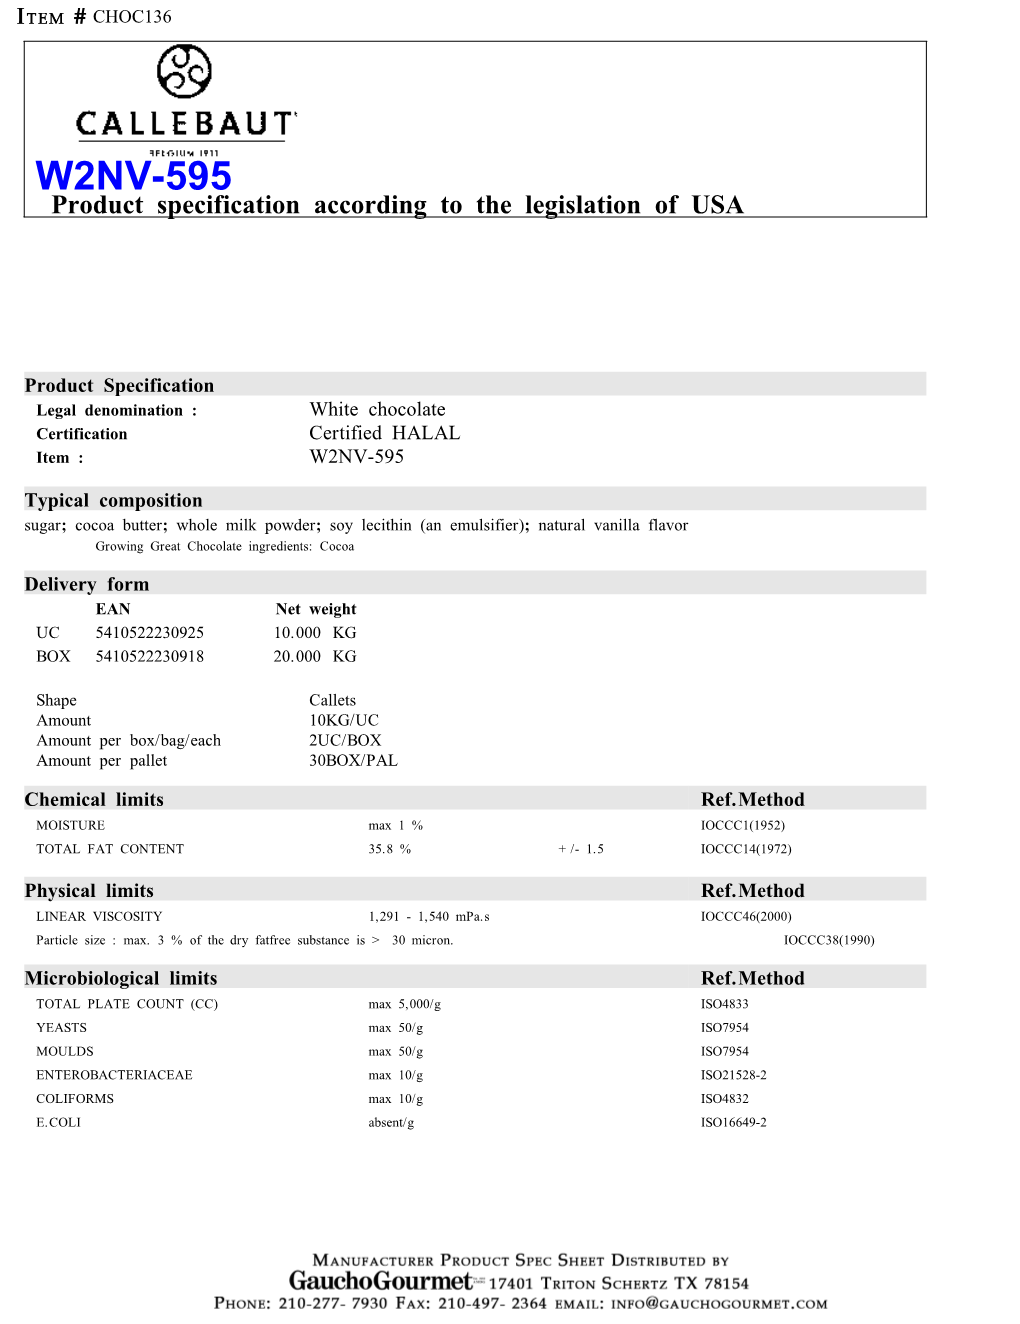 W2NV-595 Product Specification According to the Legislation of USA